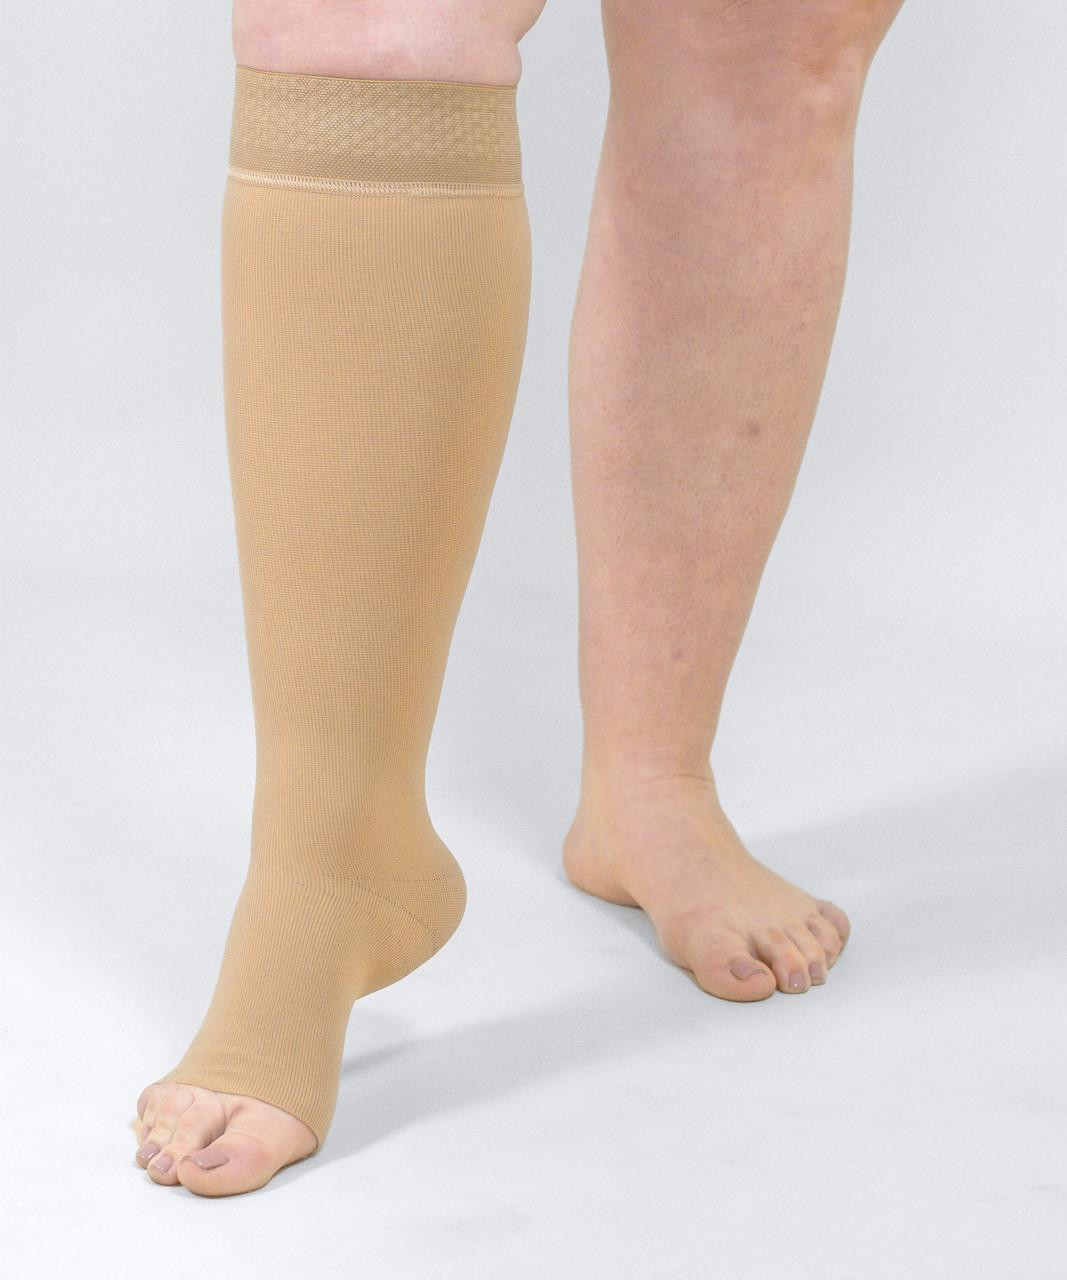 https://cdn11.bigcommerce.com/s-js3ghti4c3/images/stencil/1280x1280/products/5269/22851/pertex-light-class-i-below-knee-regular-width-compression-garment-by-sold-by-superpharmacyplus__14368.1675243433.jpg?c=2?imbypass=on